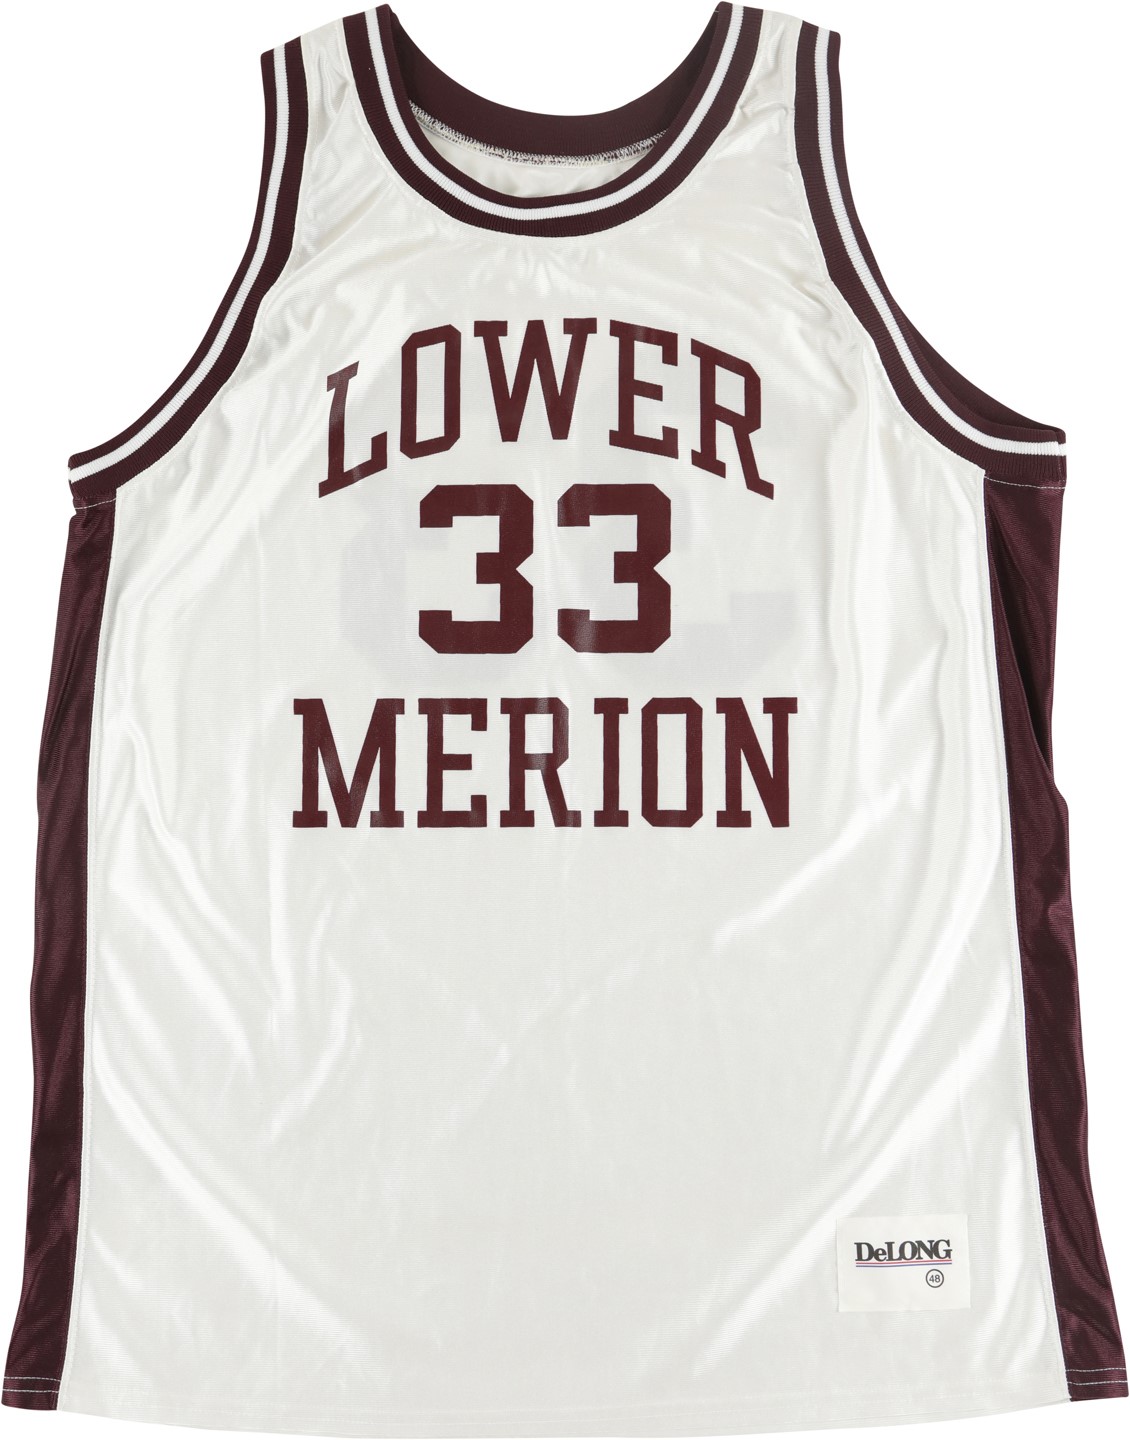 Kobe Bryant Lower Merion High School Game Worn Jersey - Sources from Kobe's Agent & Former NBA Player (MEARS A10)